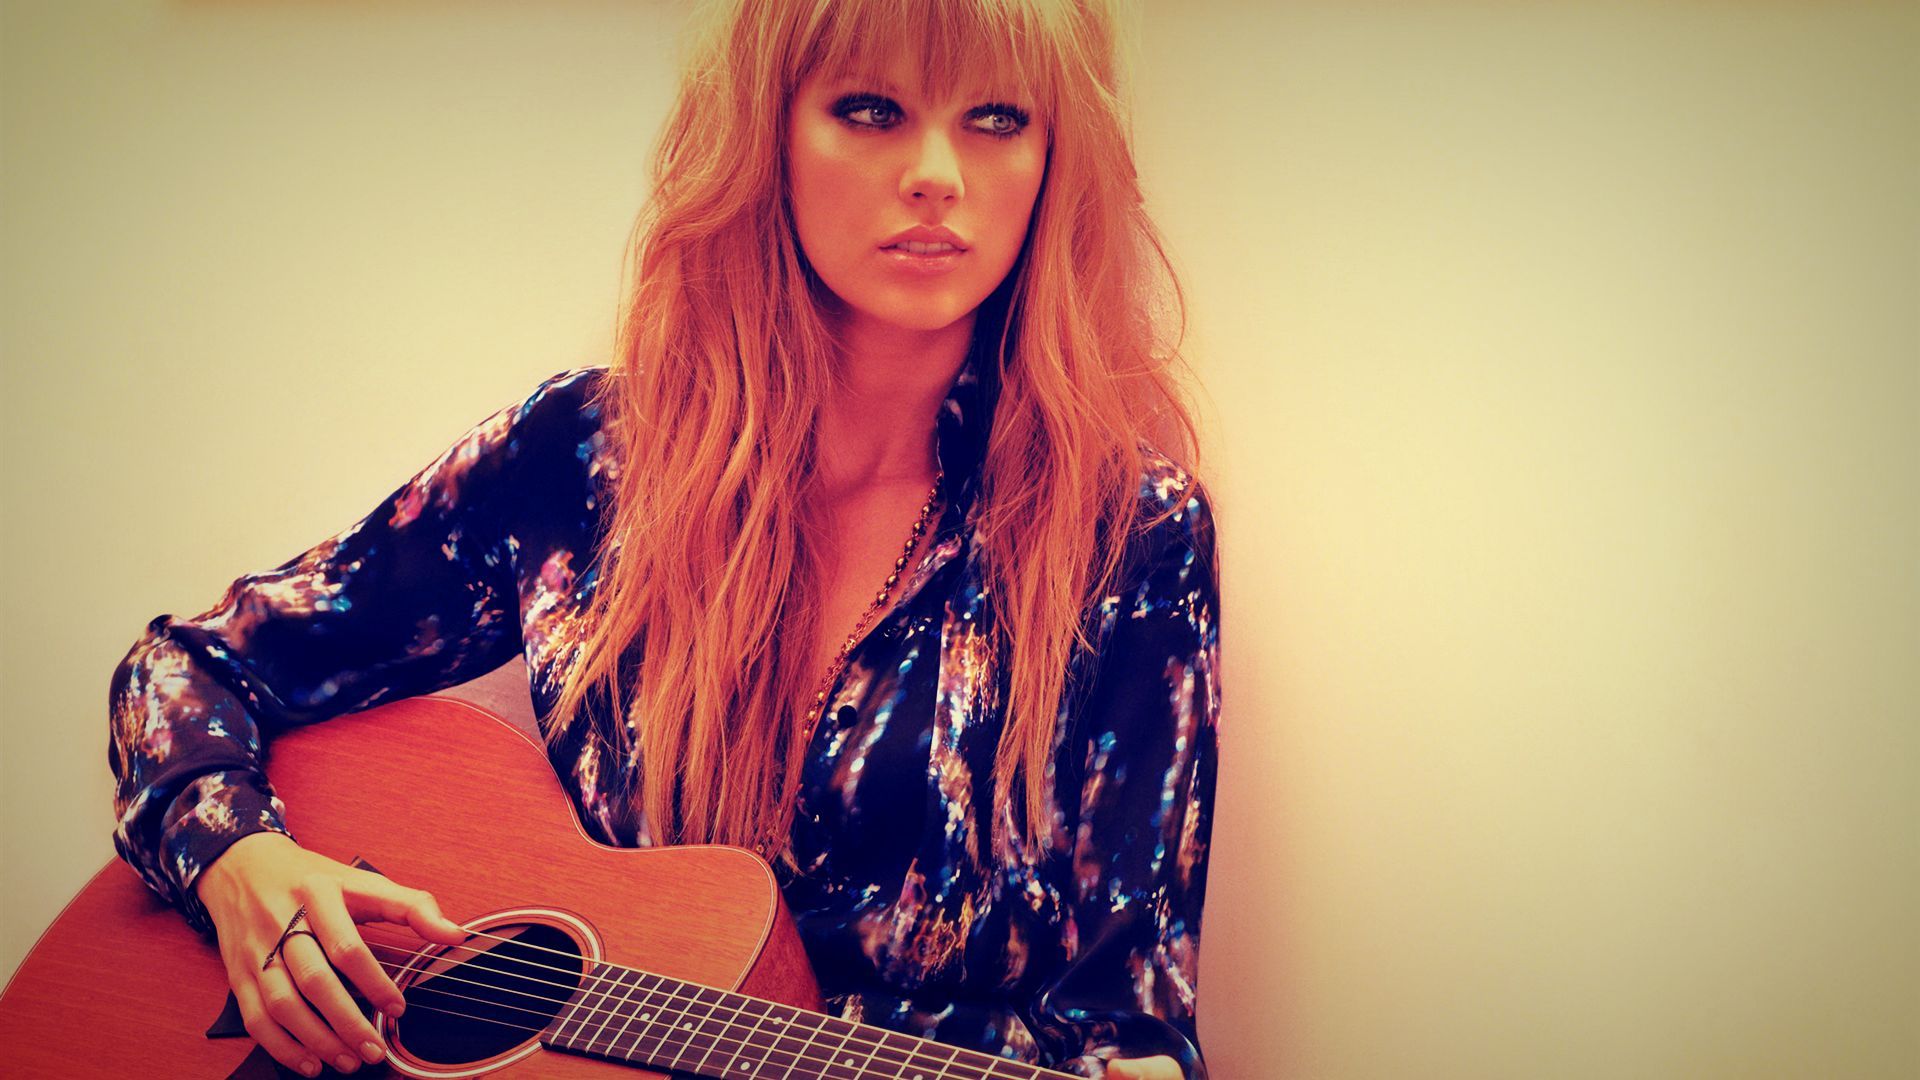 Photo Of Taylor Swift With Acoustic Guitar HD Wallpaper